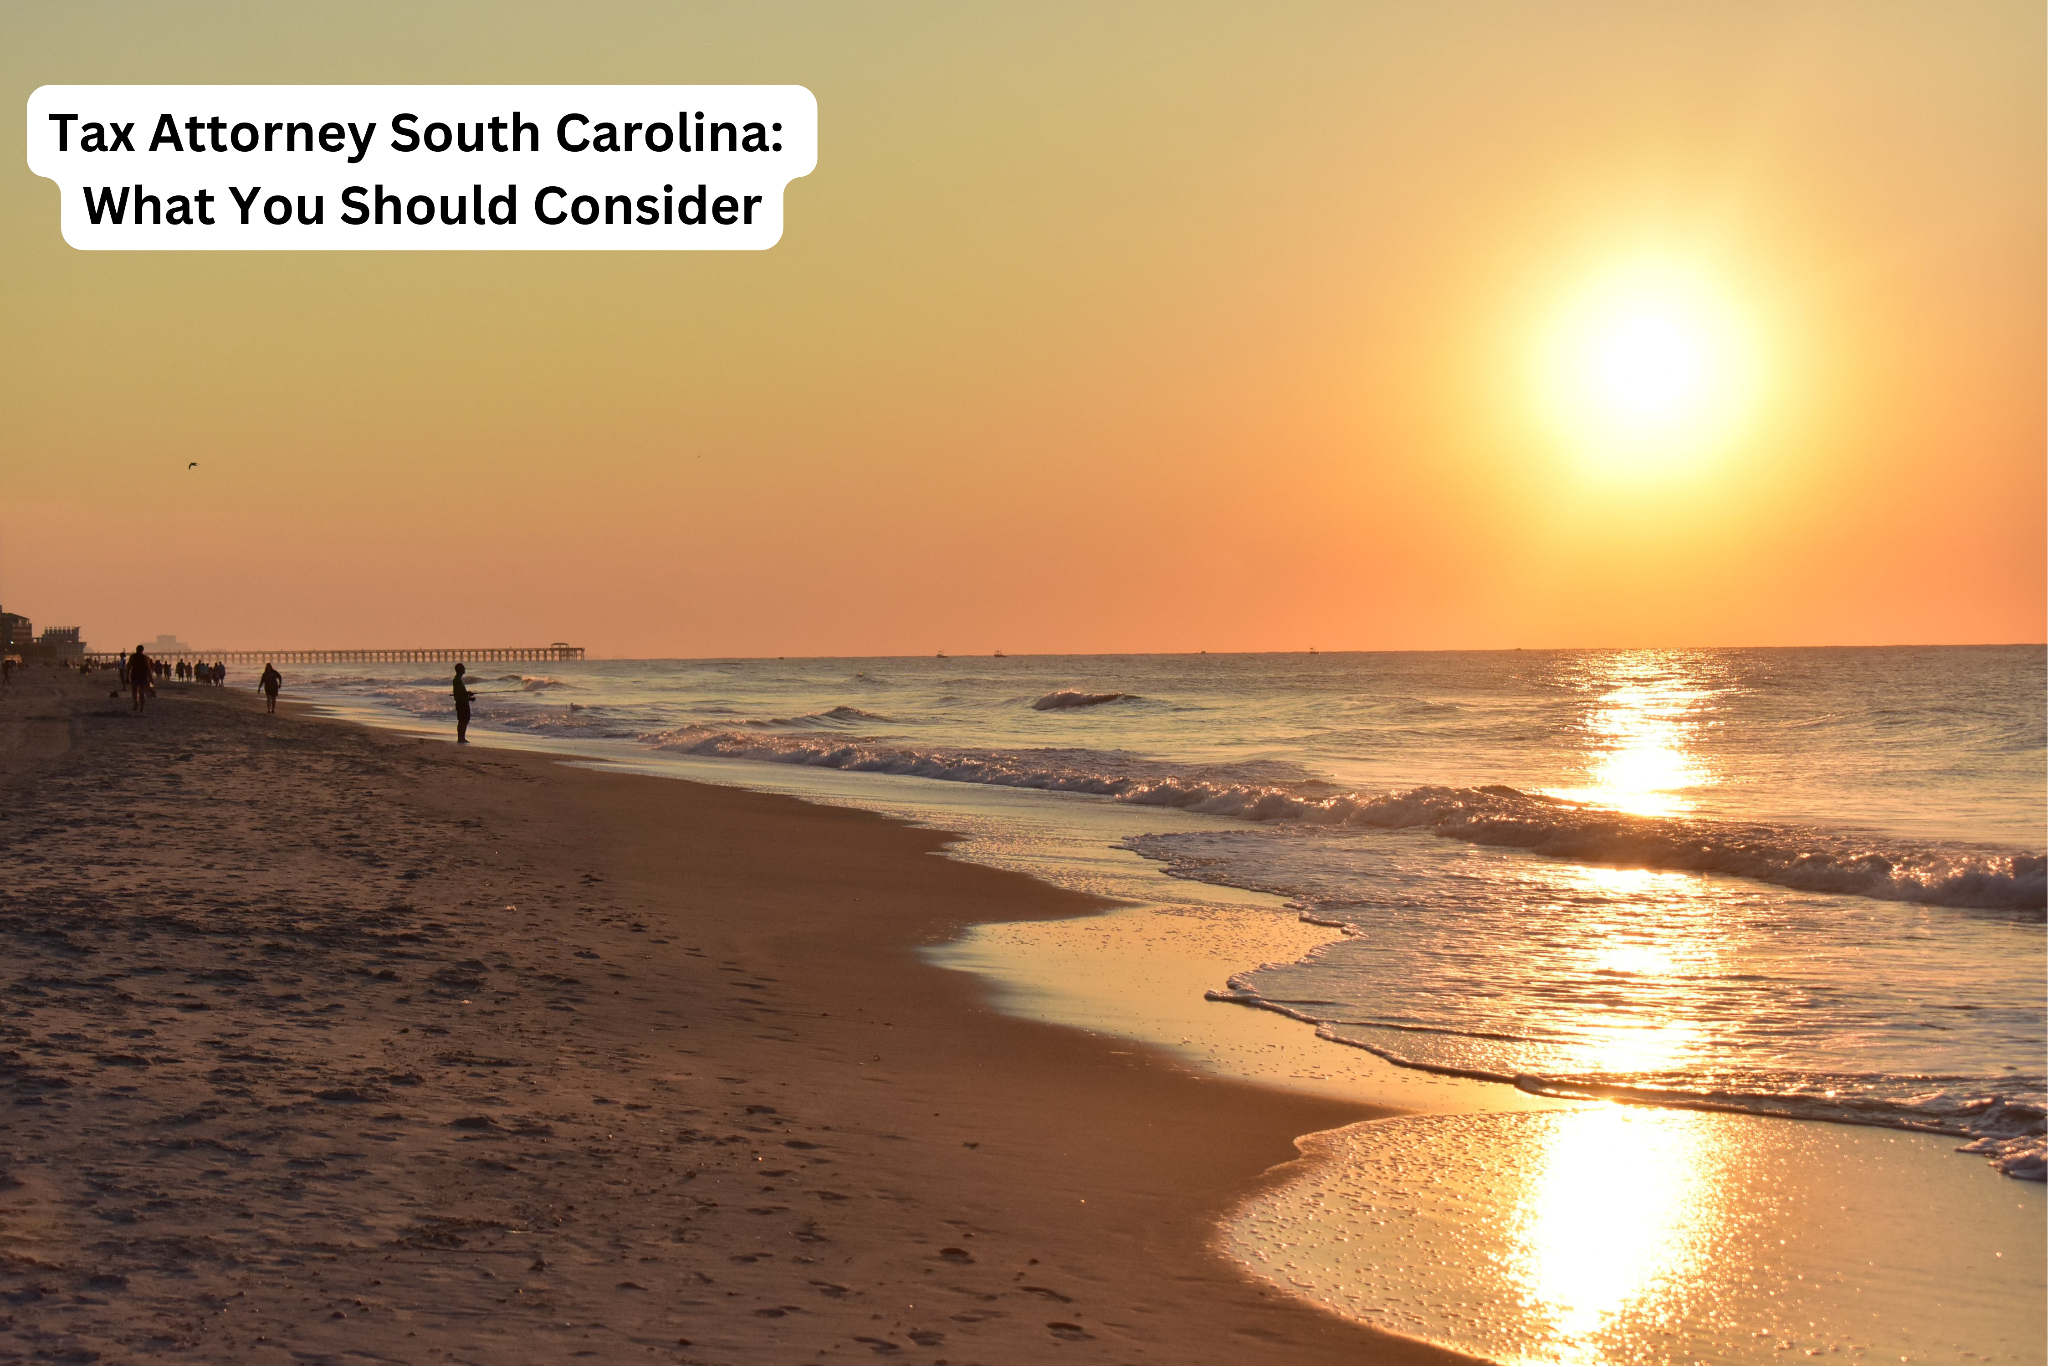 Tax Attorney South Carolina: What You Should Consider